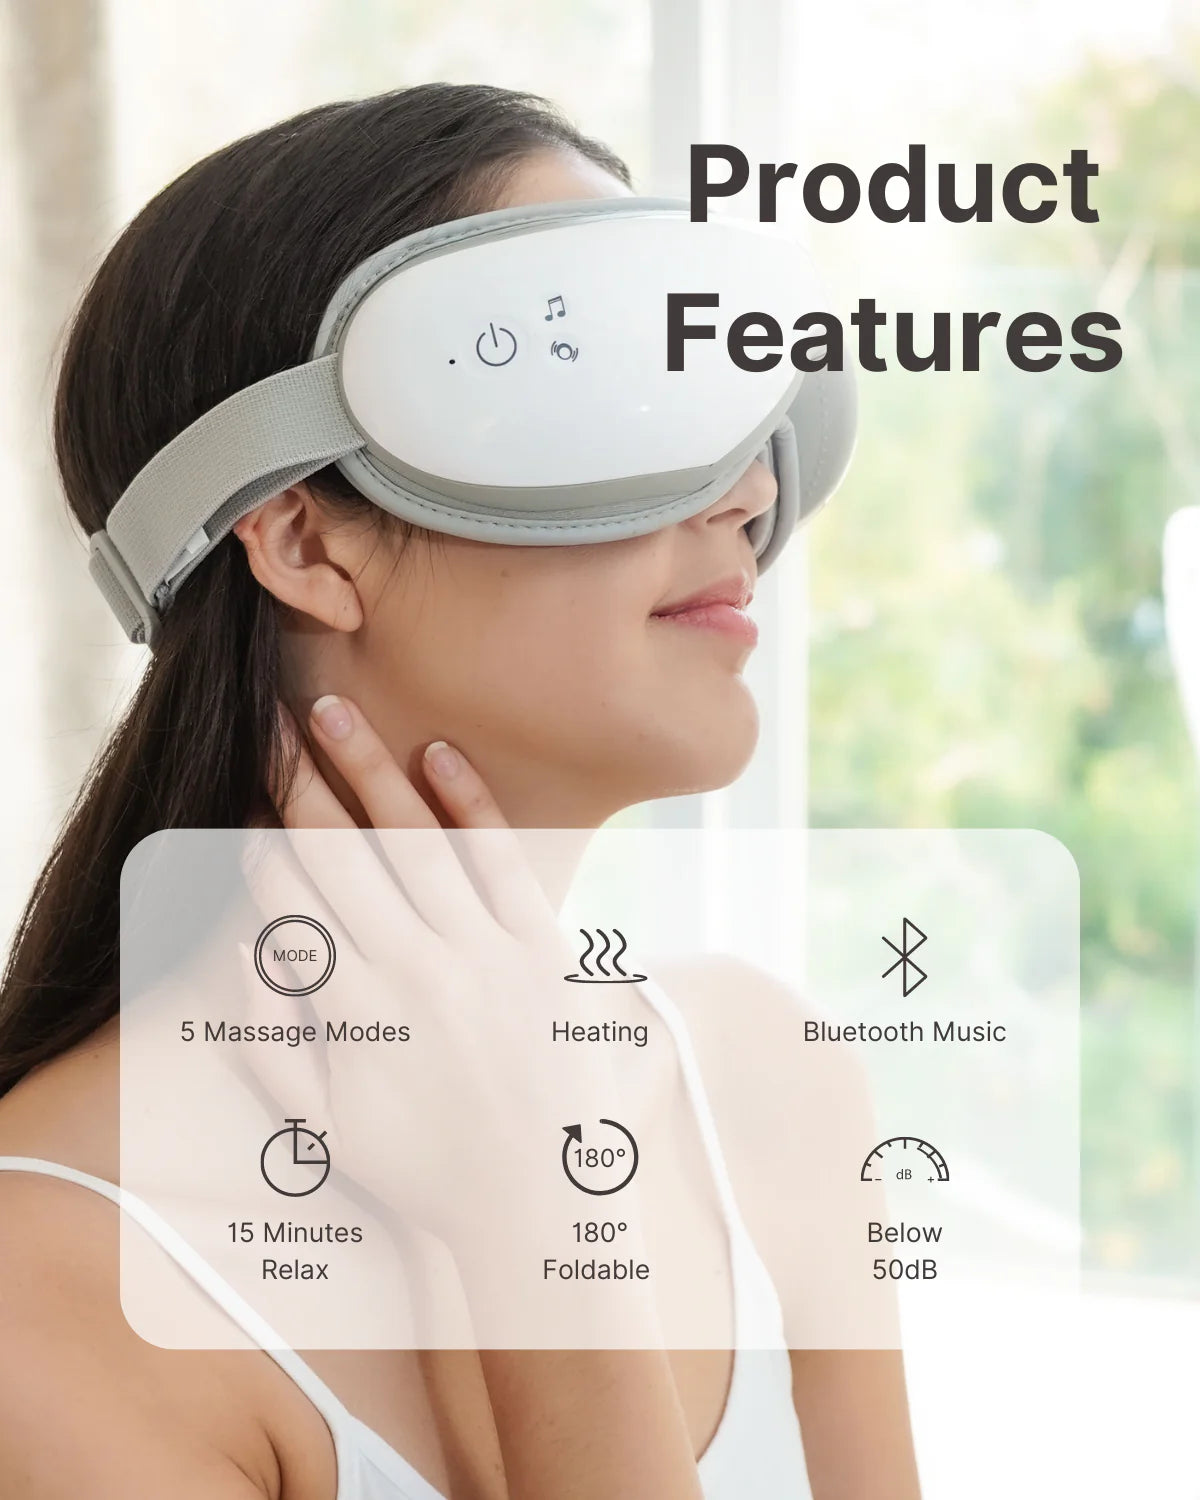 A woman wearing a white Renpho EU Eyeris 1 Eye Massager with massage and heating functions advertised by accompanying icons detailing features like Bluetooth music, 180-degree heat, and quiet operation. She smiles slightly, experiencing the mask indoors.